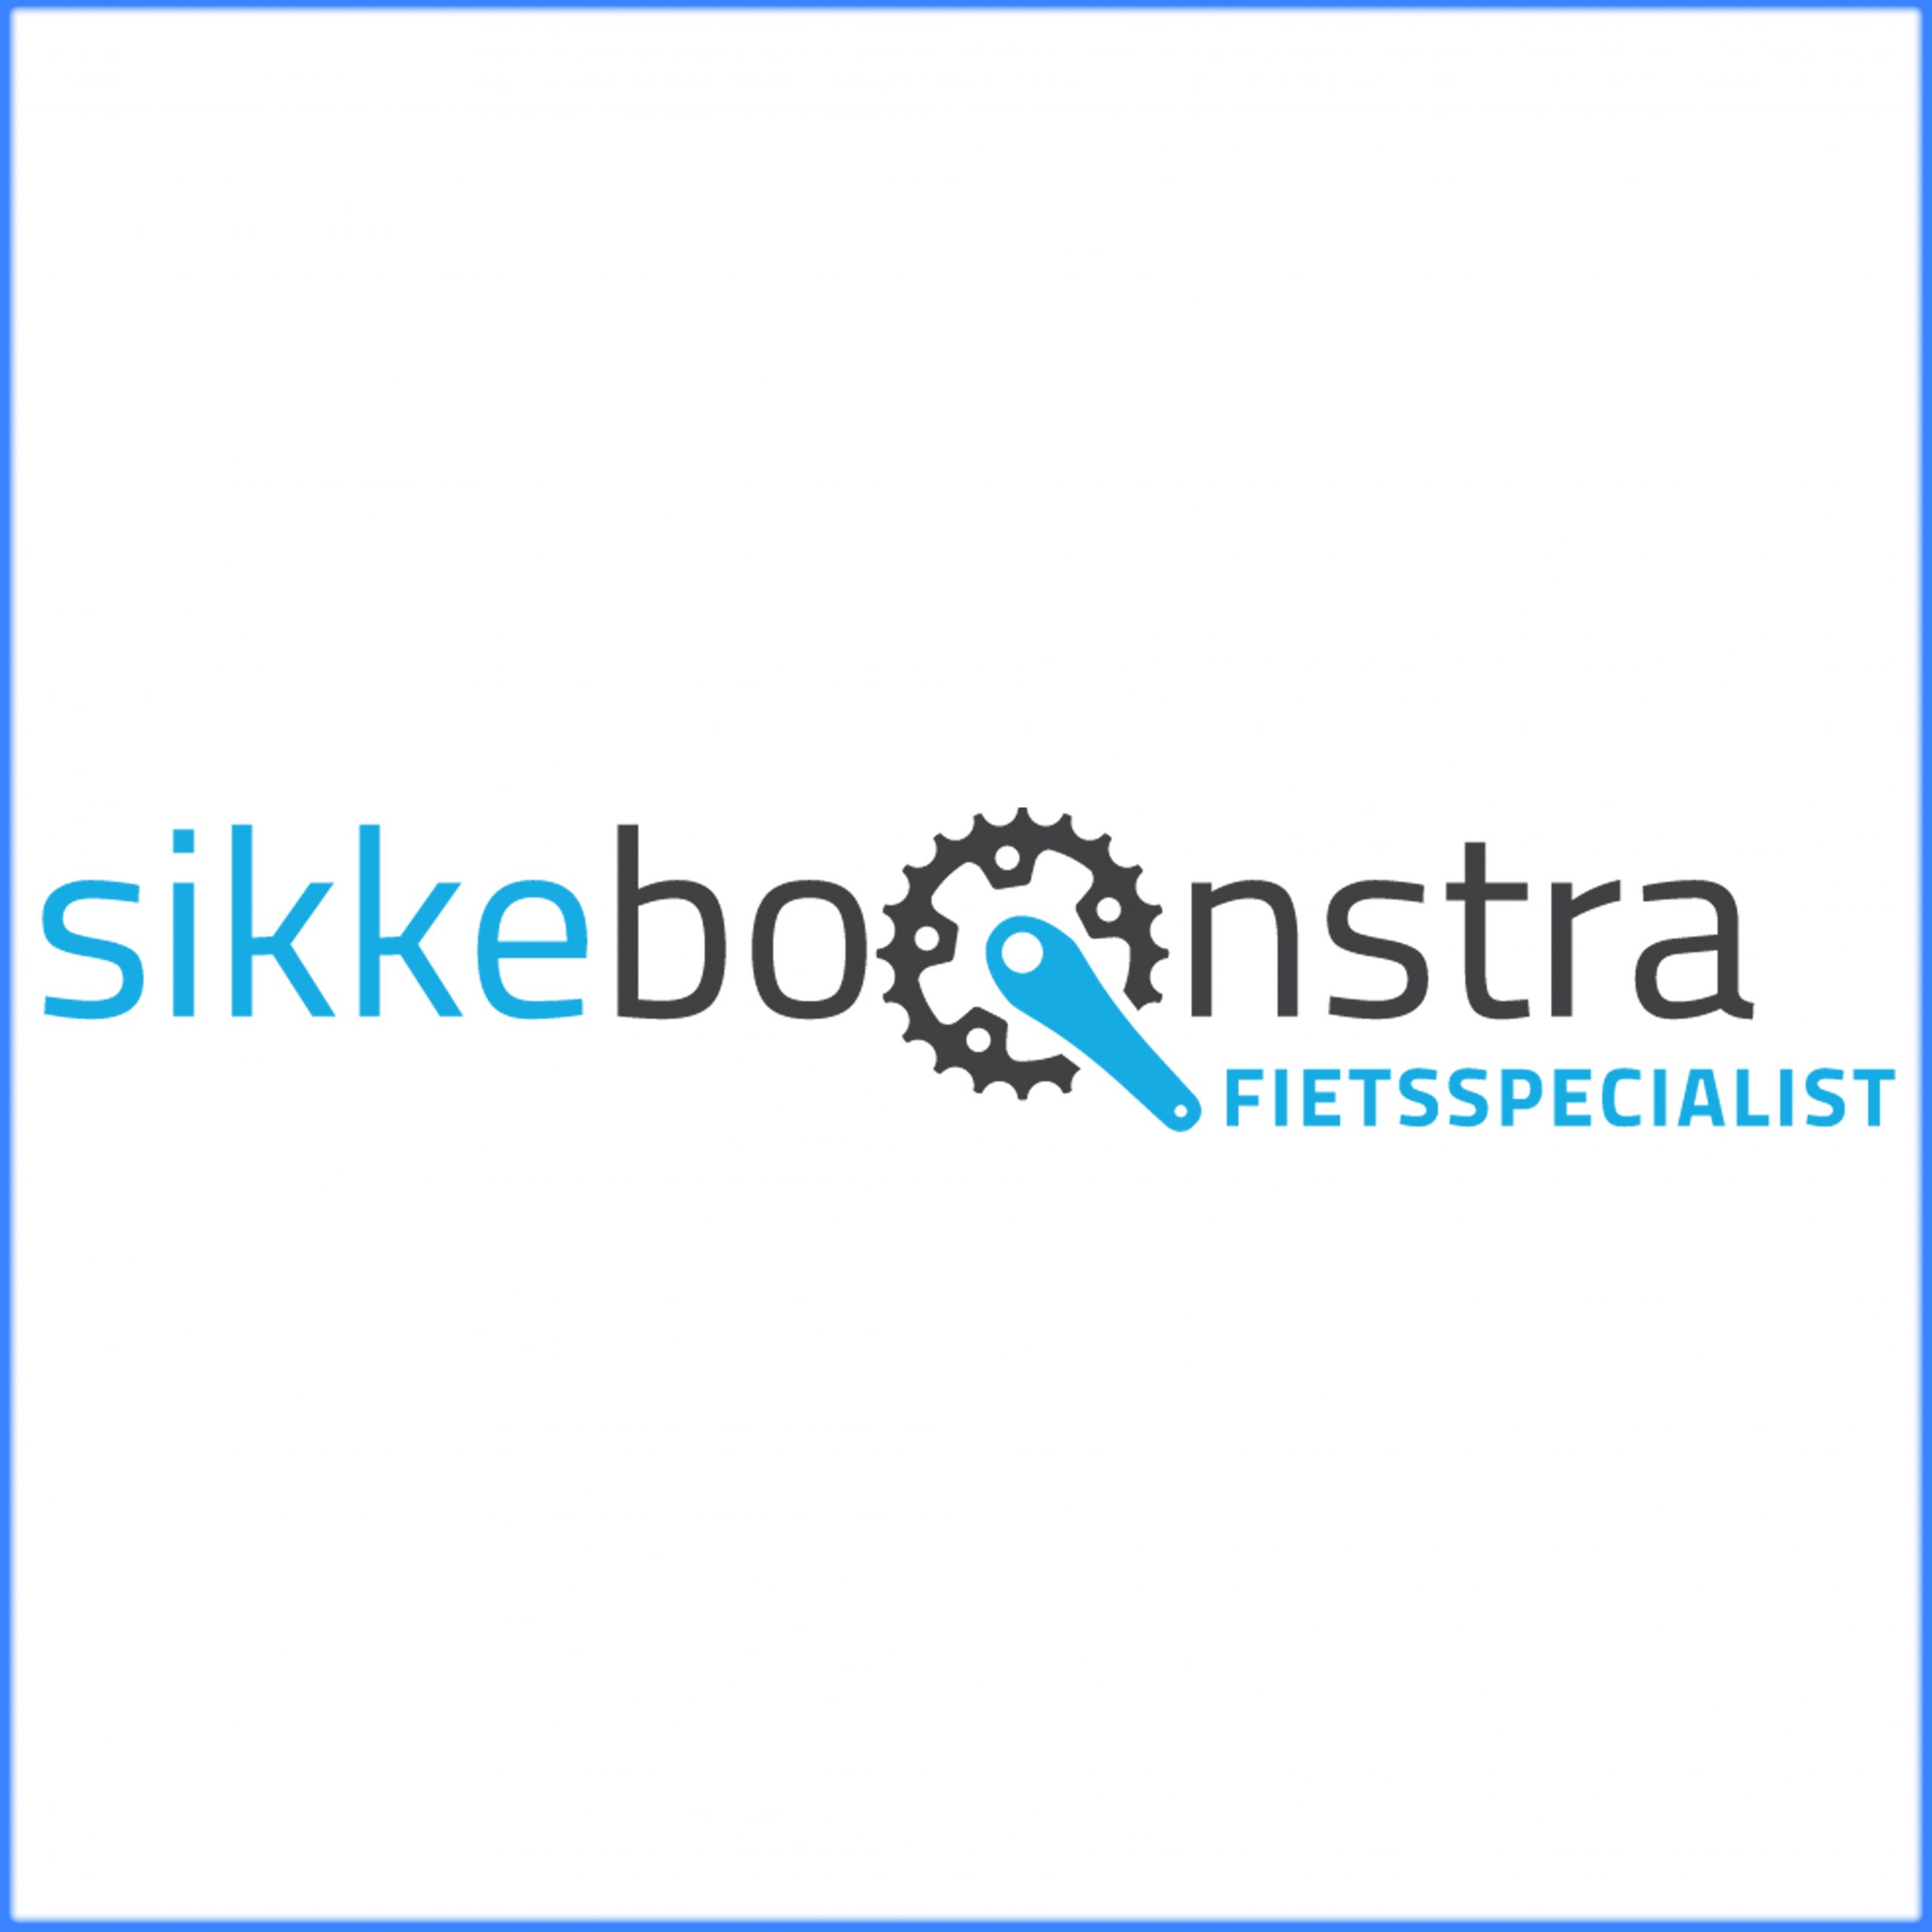 Sikke Boonstra